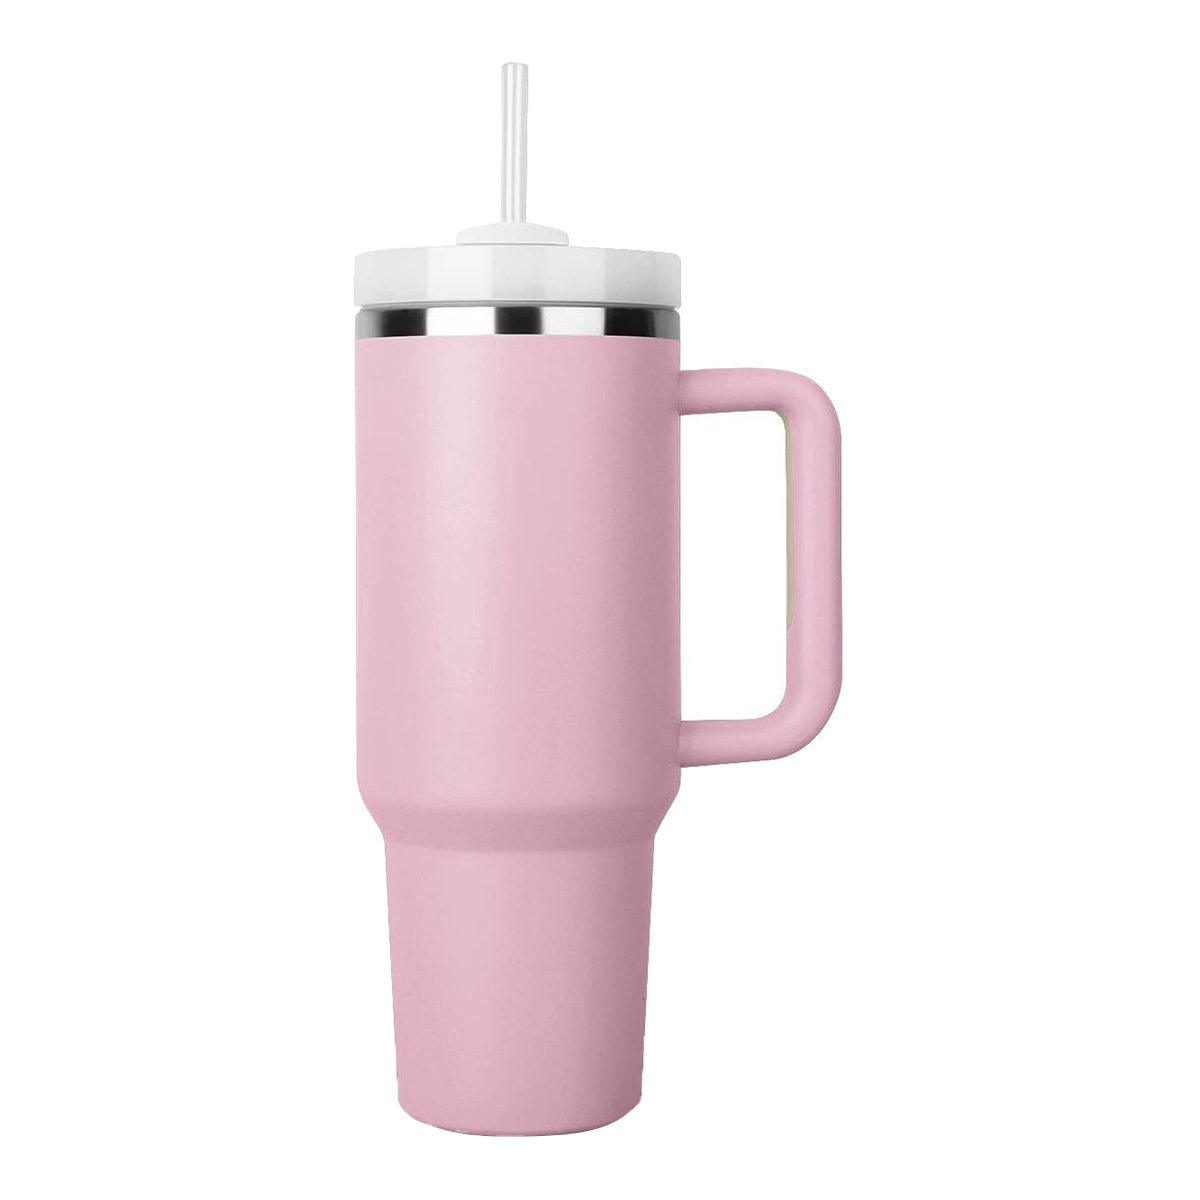 https://www.bulkflask.com/wp-content/uploads/2022/07/wholesale-40oz-Stainless-Steel-tumblers-with-Lid-Straw-H2.0-pink.jpg